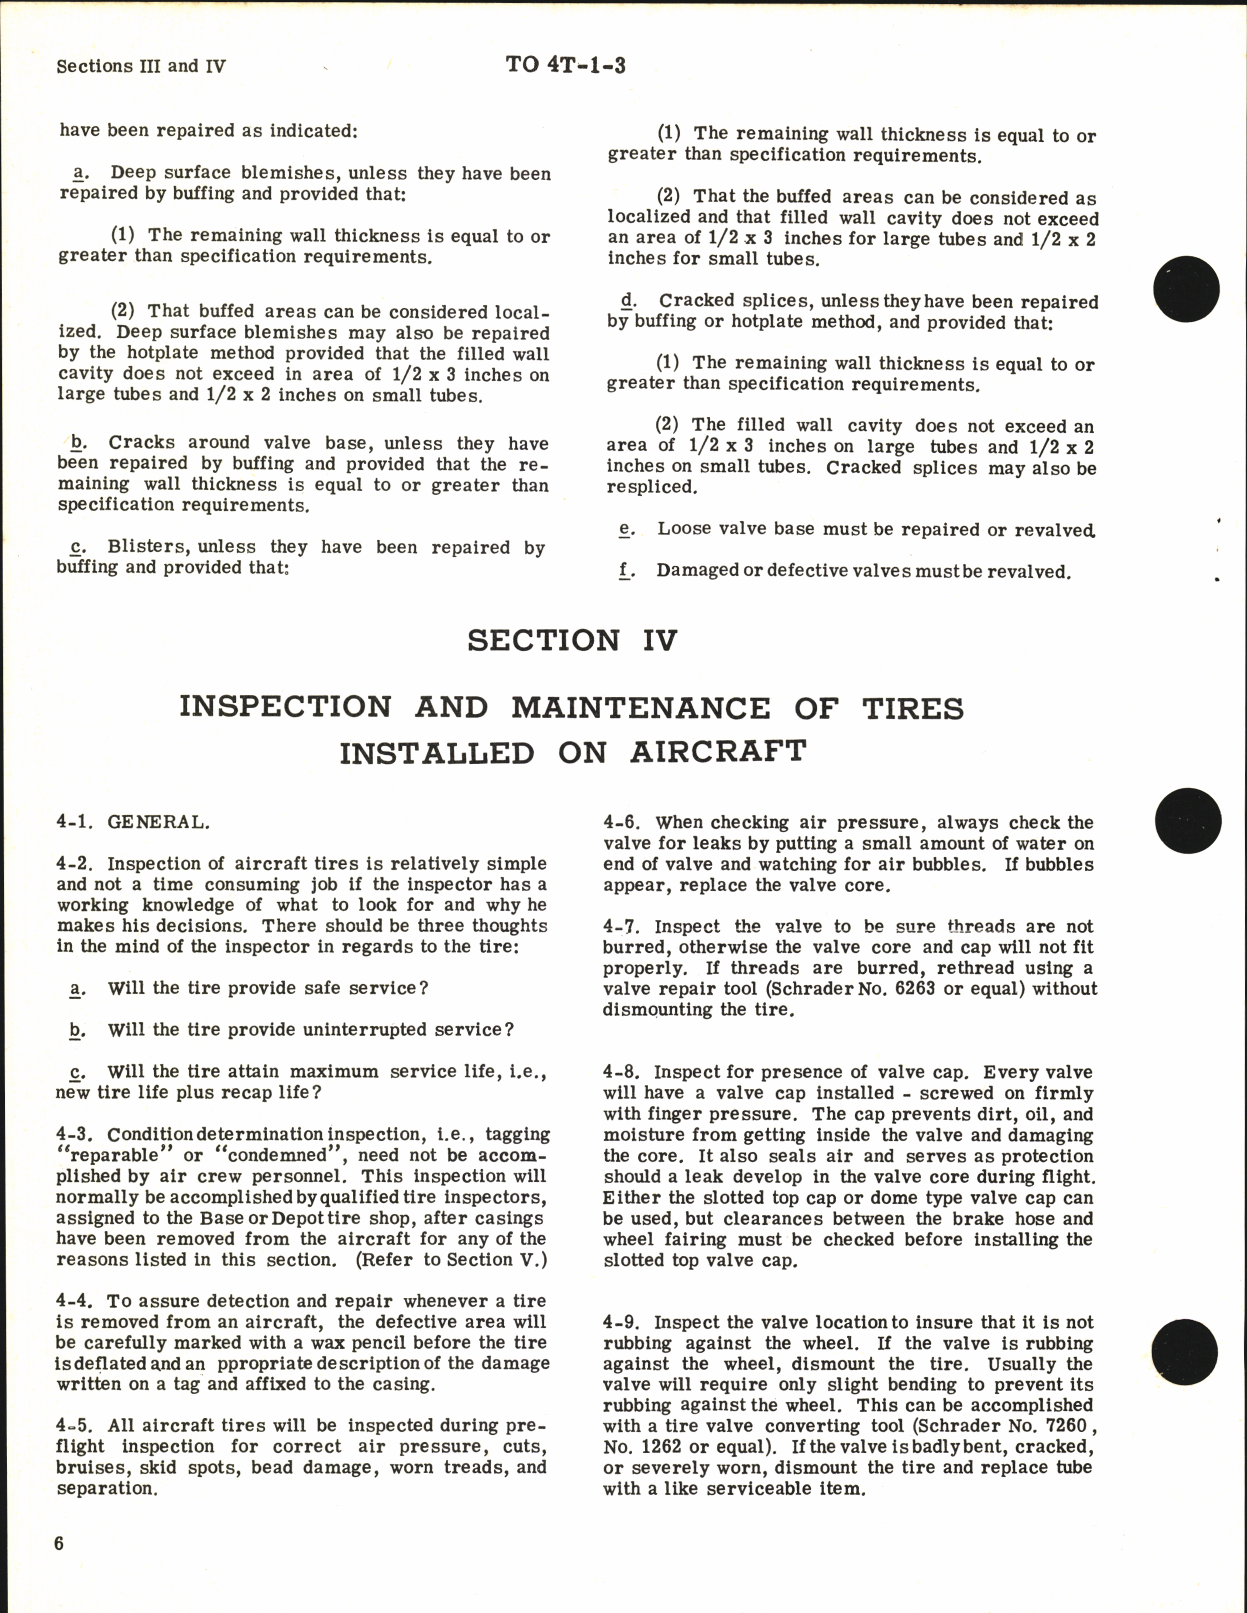 Sample page 8 from AirCorps Library document: Inspection, Maintenance, Storage, and Disposition of Aircraft Tire Casings and Inner Tubes